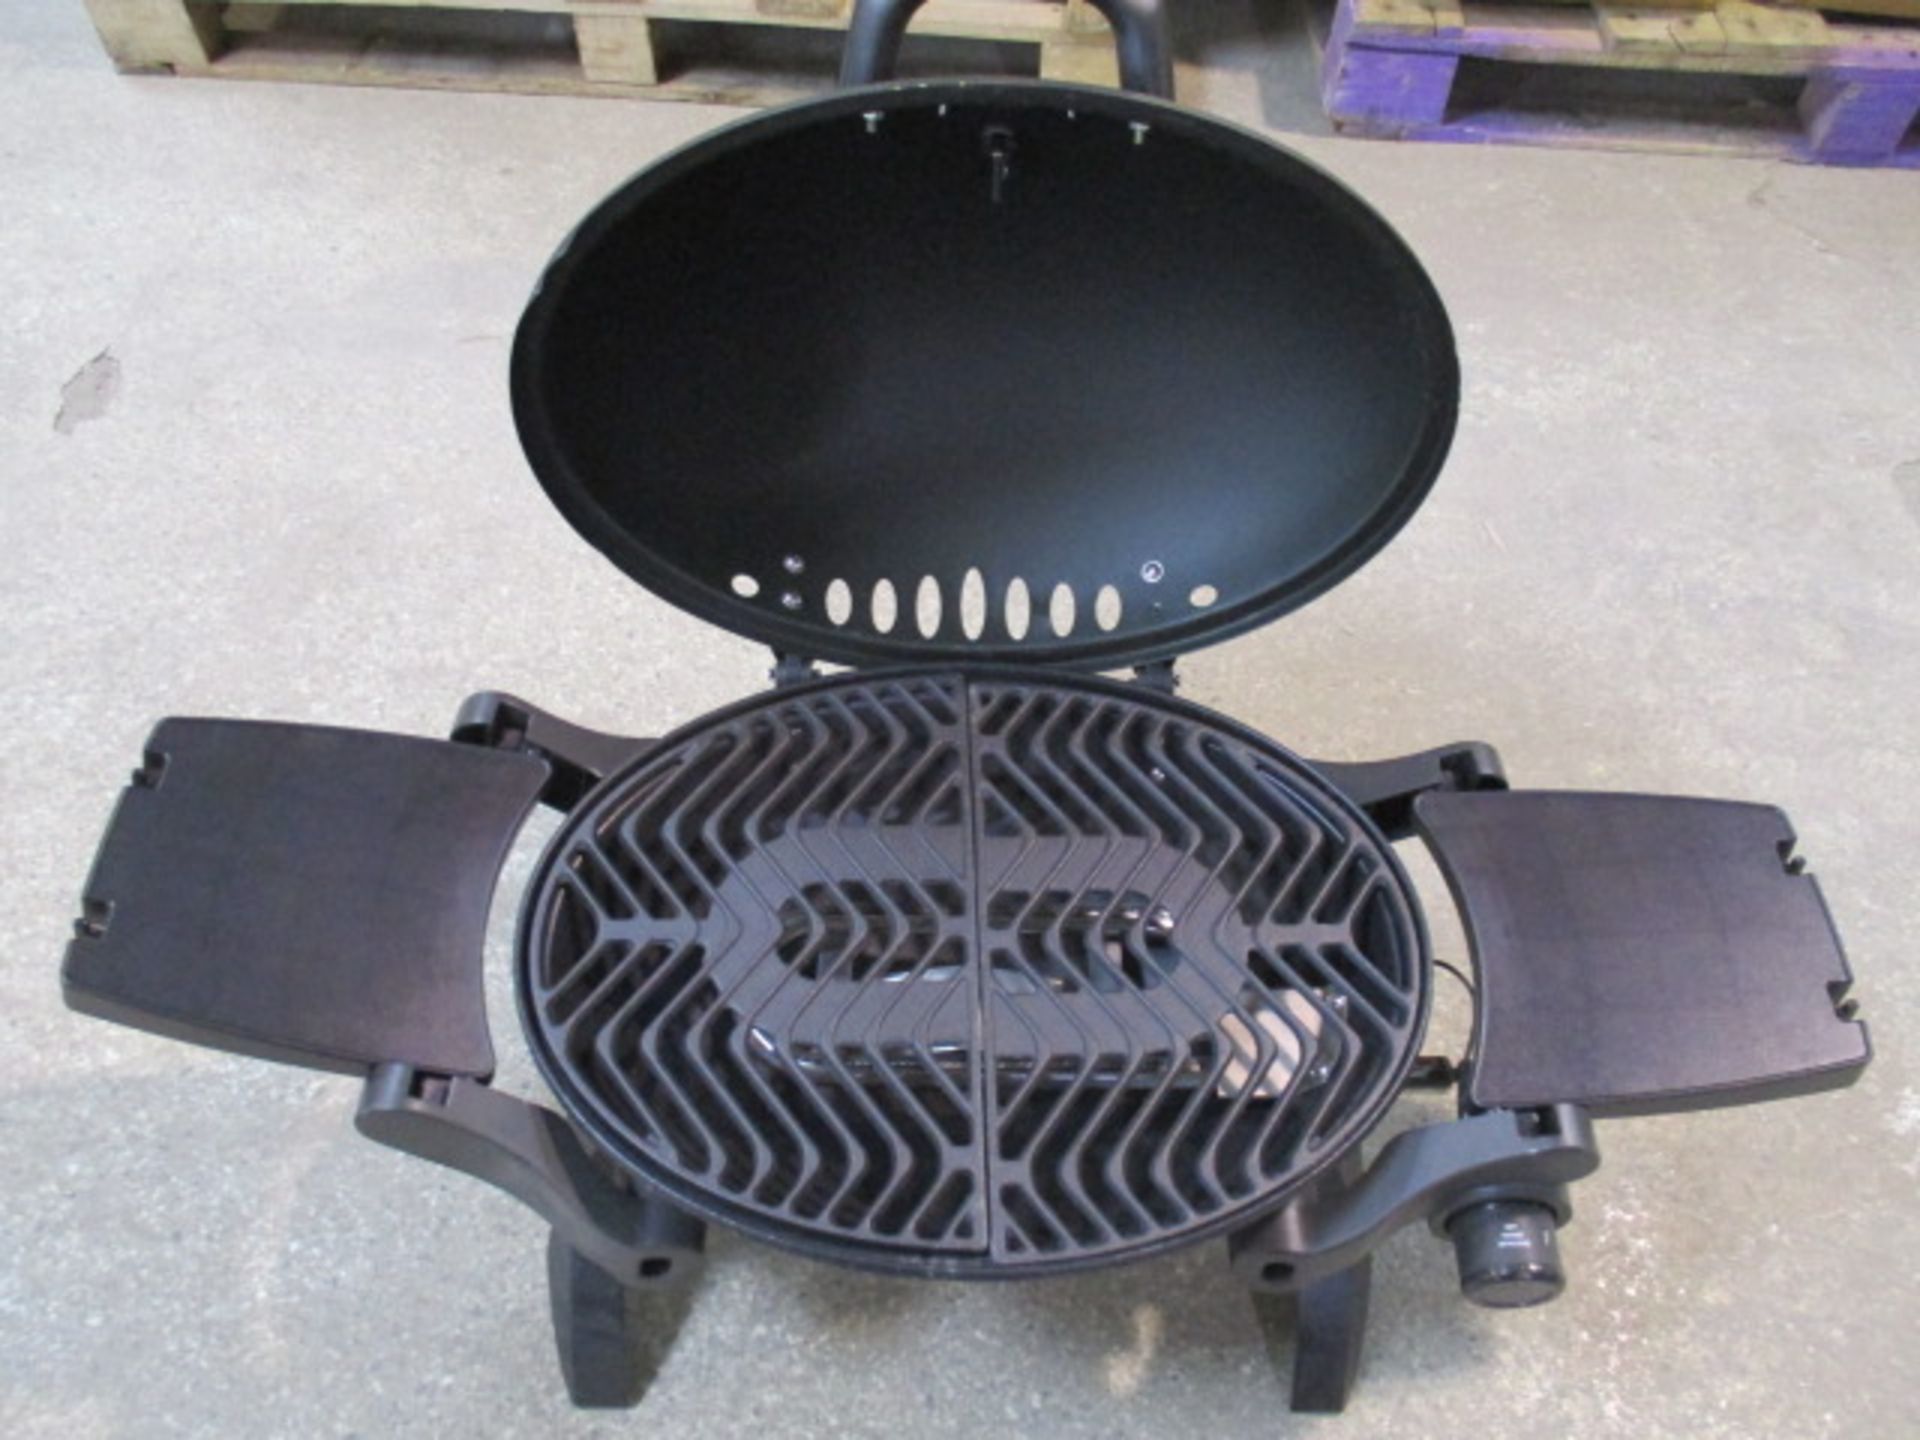 Unused Cheffette portable gas barbecue with side trays and standing legs - Image 2 of 2